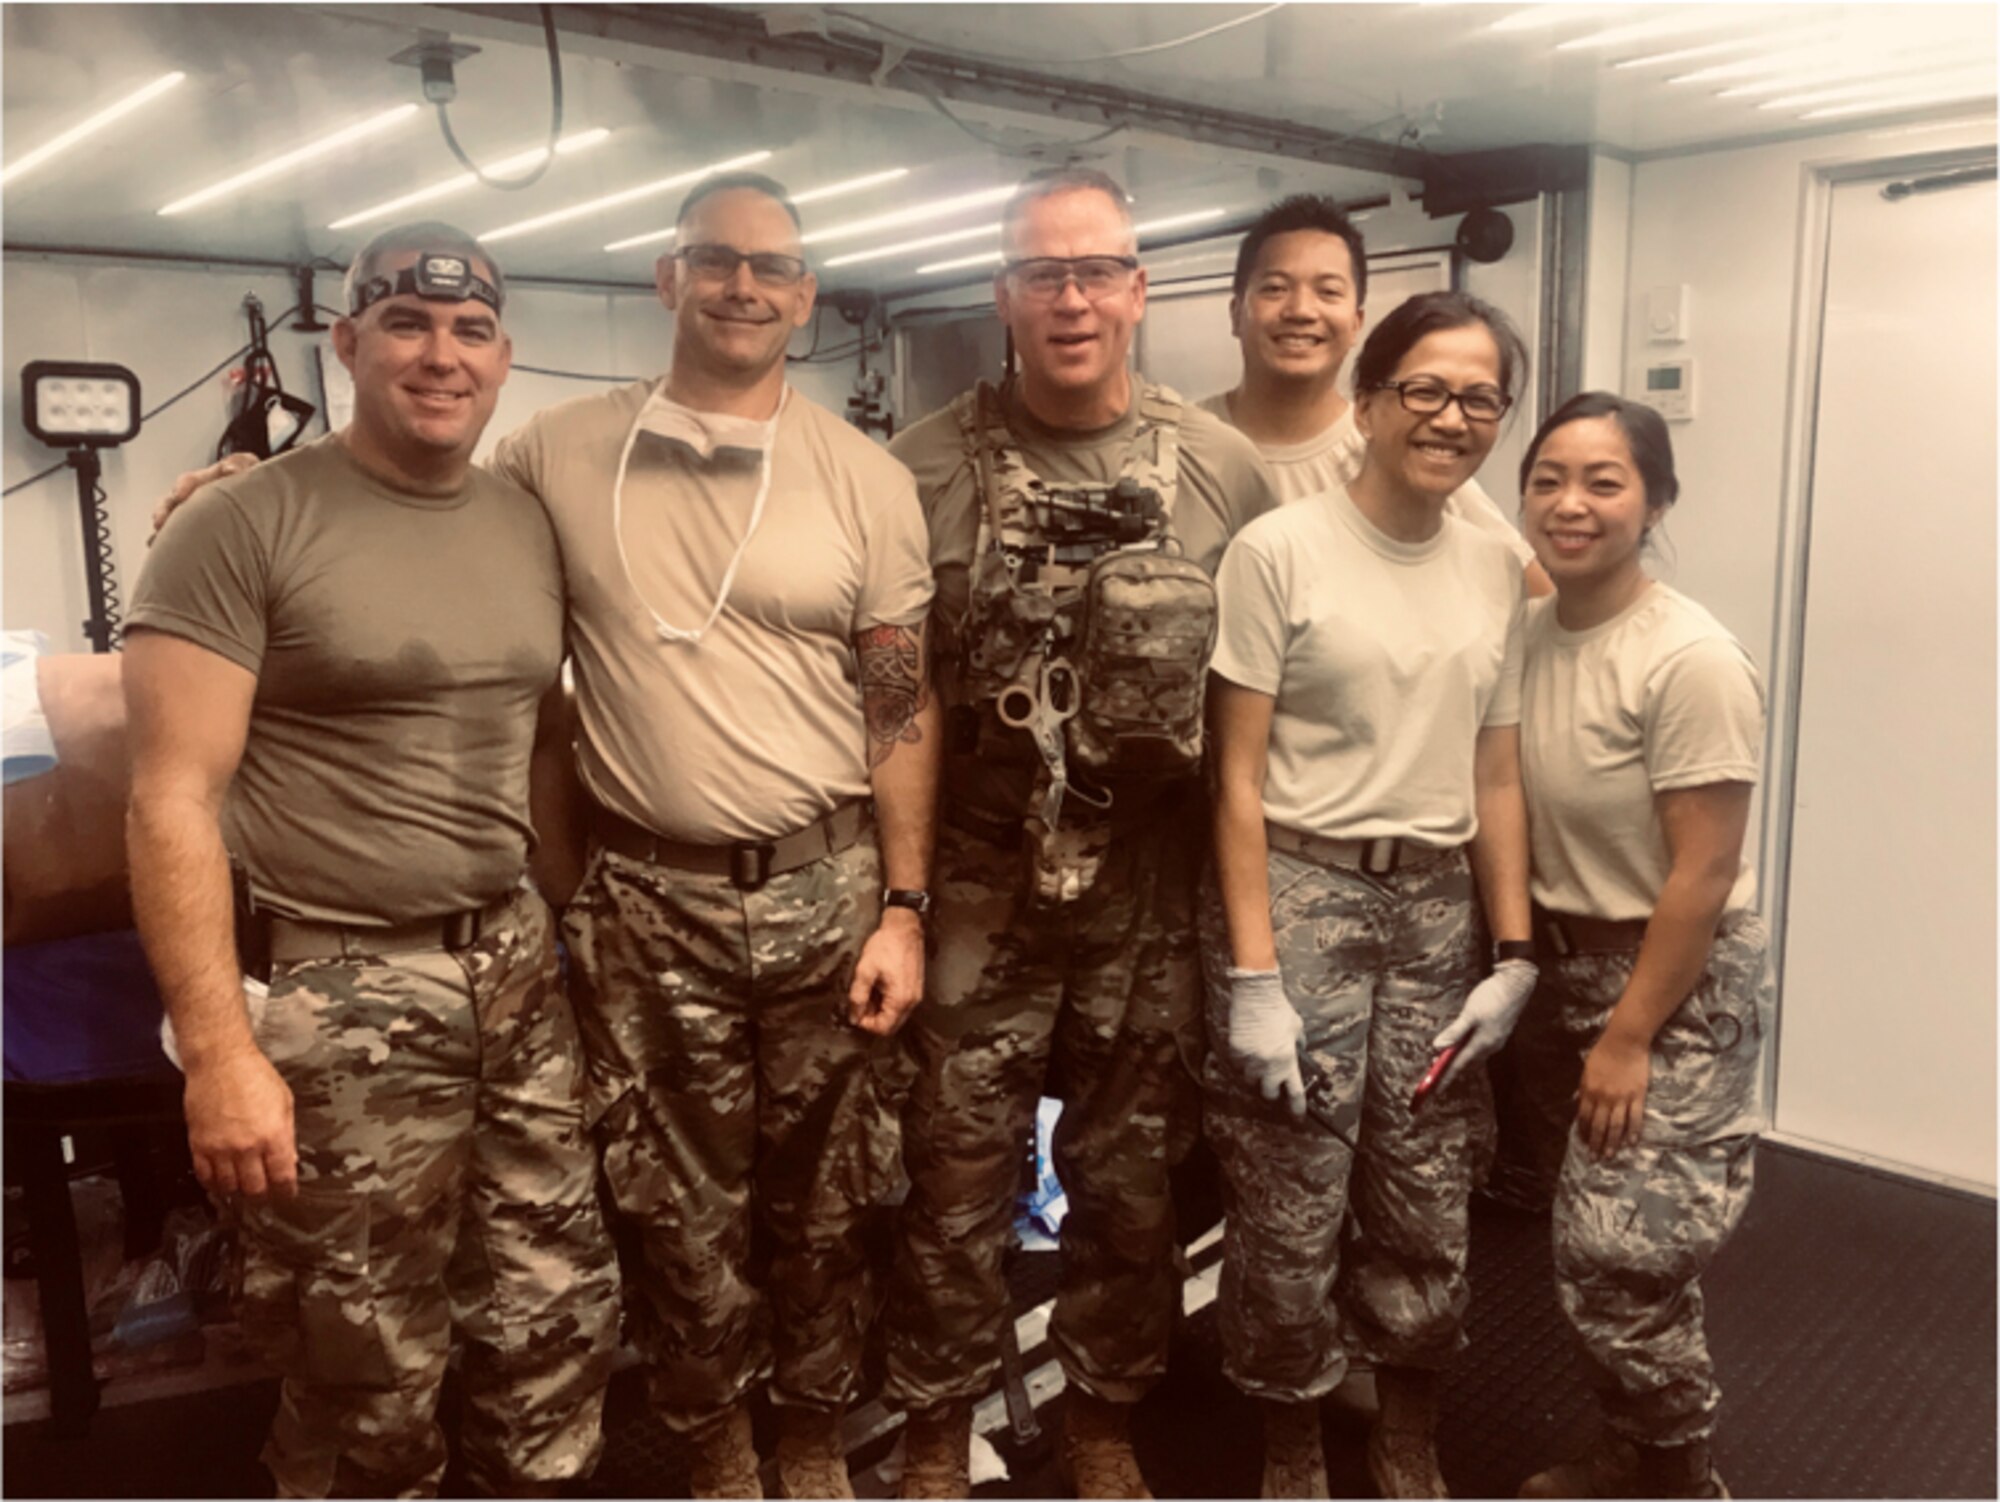 Left to Right, Lt. Col. (Dr.) Sean Martin, Maj. Jason Vallot, Lt. Col. (Dr.) Jesse Wells, Capt. Llewy Rimular, Lt. Col. Jessica Arcilla and Tech Sgt. MaryLou Ancheta of the 349th Medical Squadron, Travis Air Force Base, California, comprise the first team of Air Force Reservists to complete the Air Force's new Ground Surgical Team training course. (Courtesy photos)